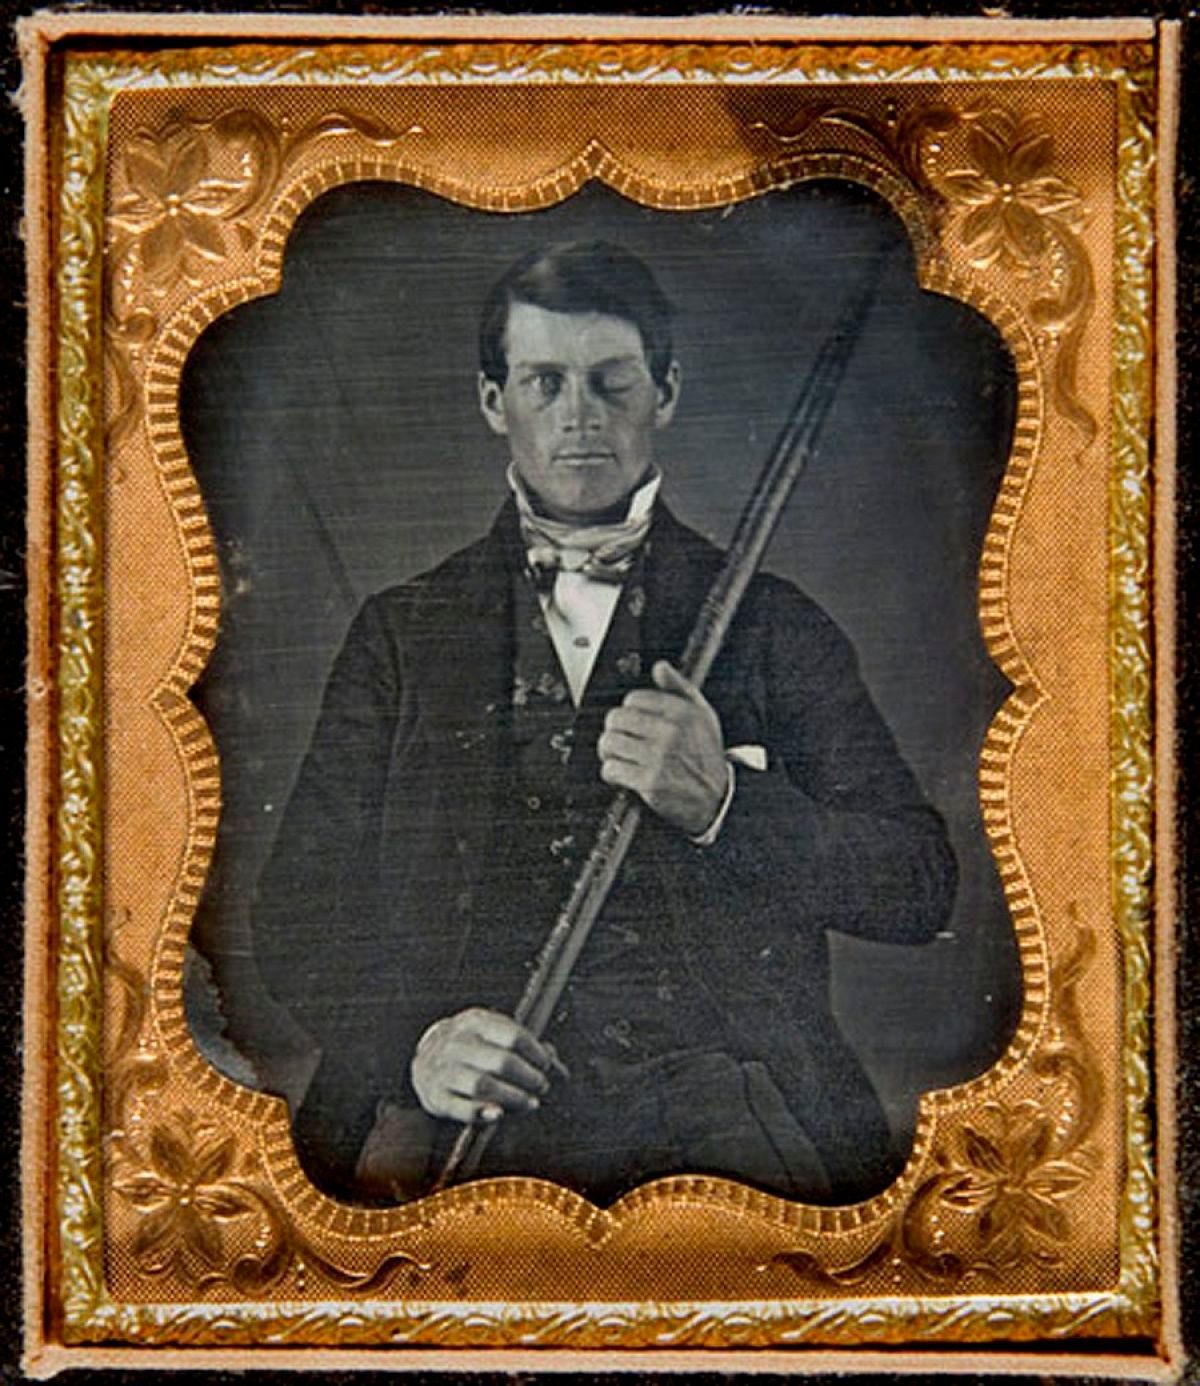 case study the case of phineas gage